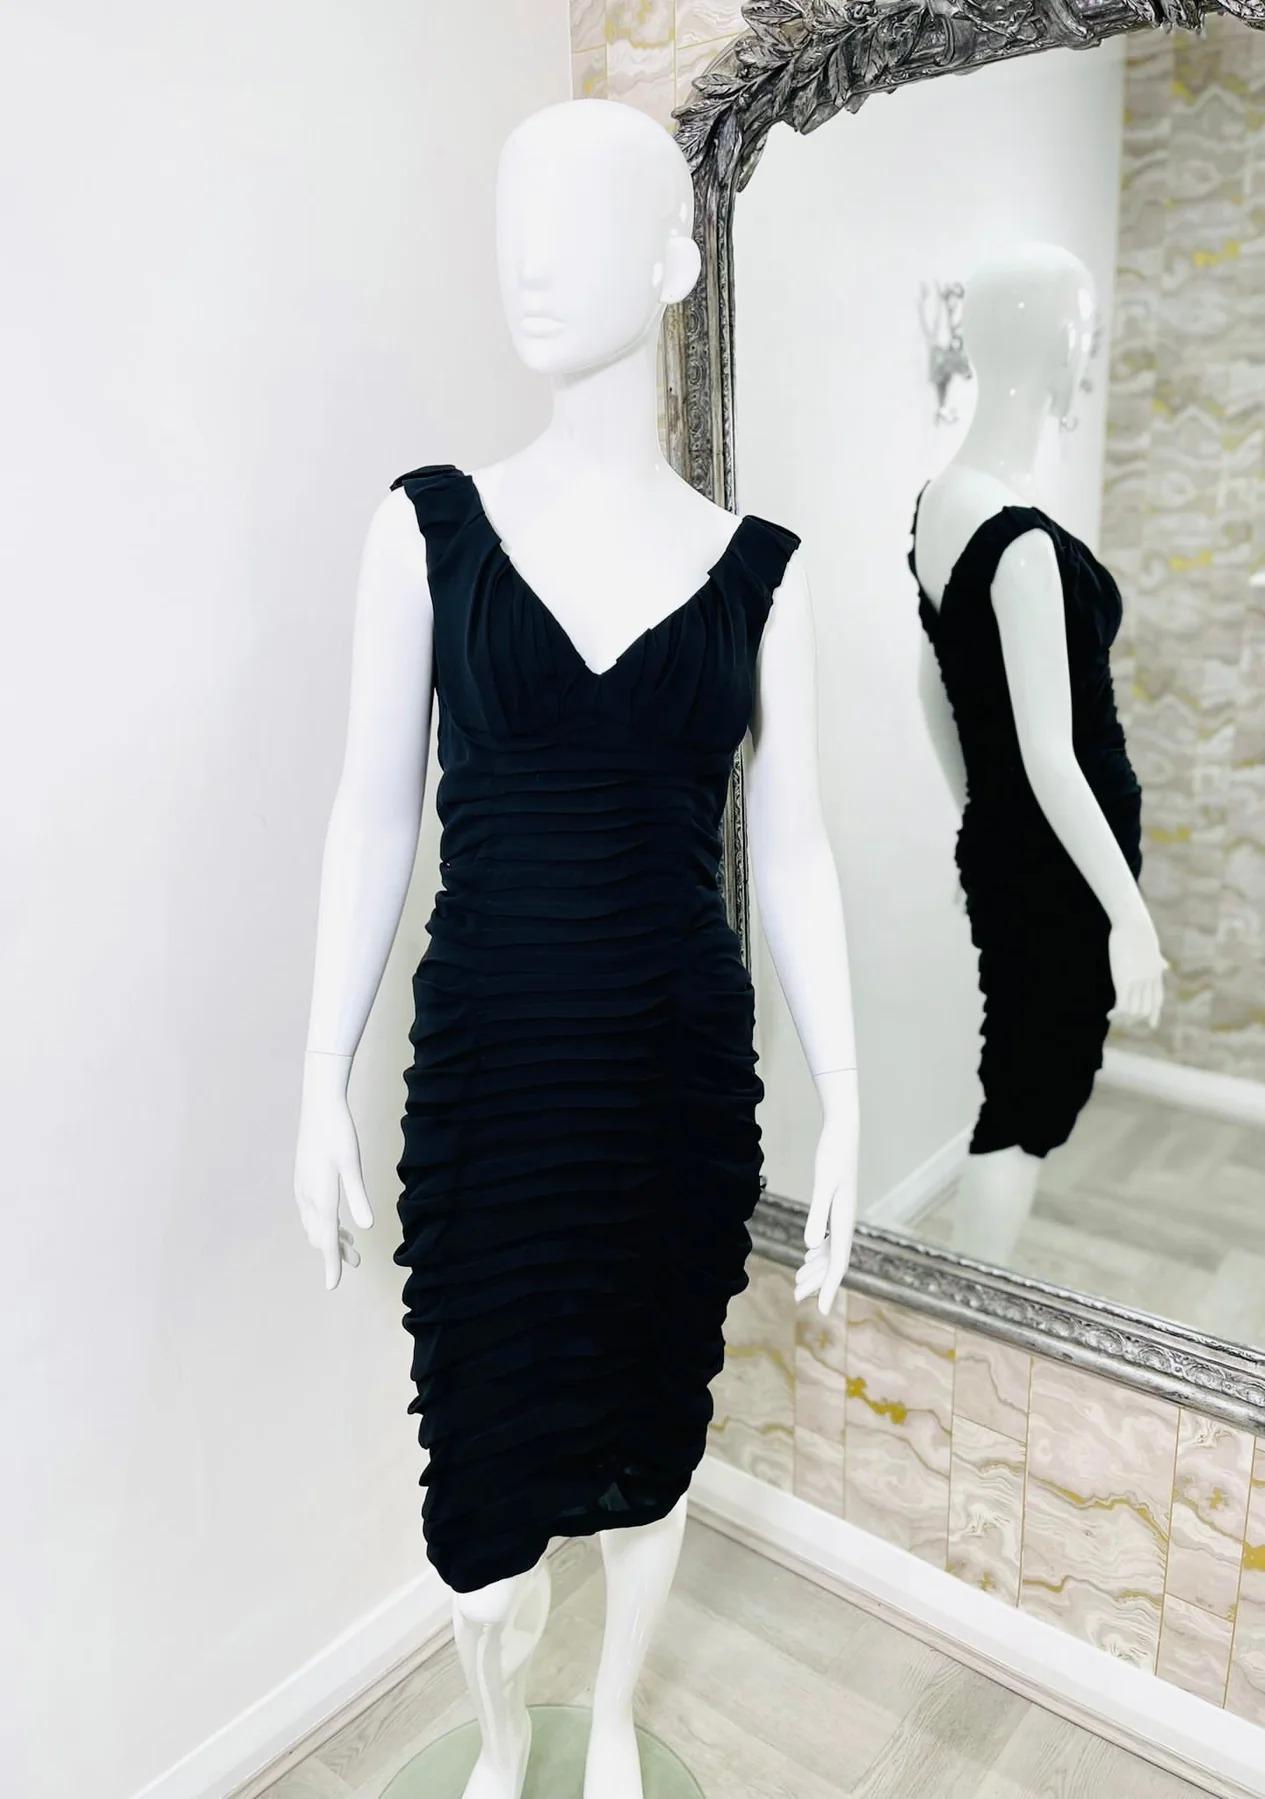 Yves Saint Laurent Silk Ruched Dress

Black, sleeveless dress with ruching throughout.

Additional information:
Size – 38FR
Composition- Silk
Condition – Very Good